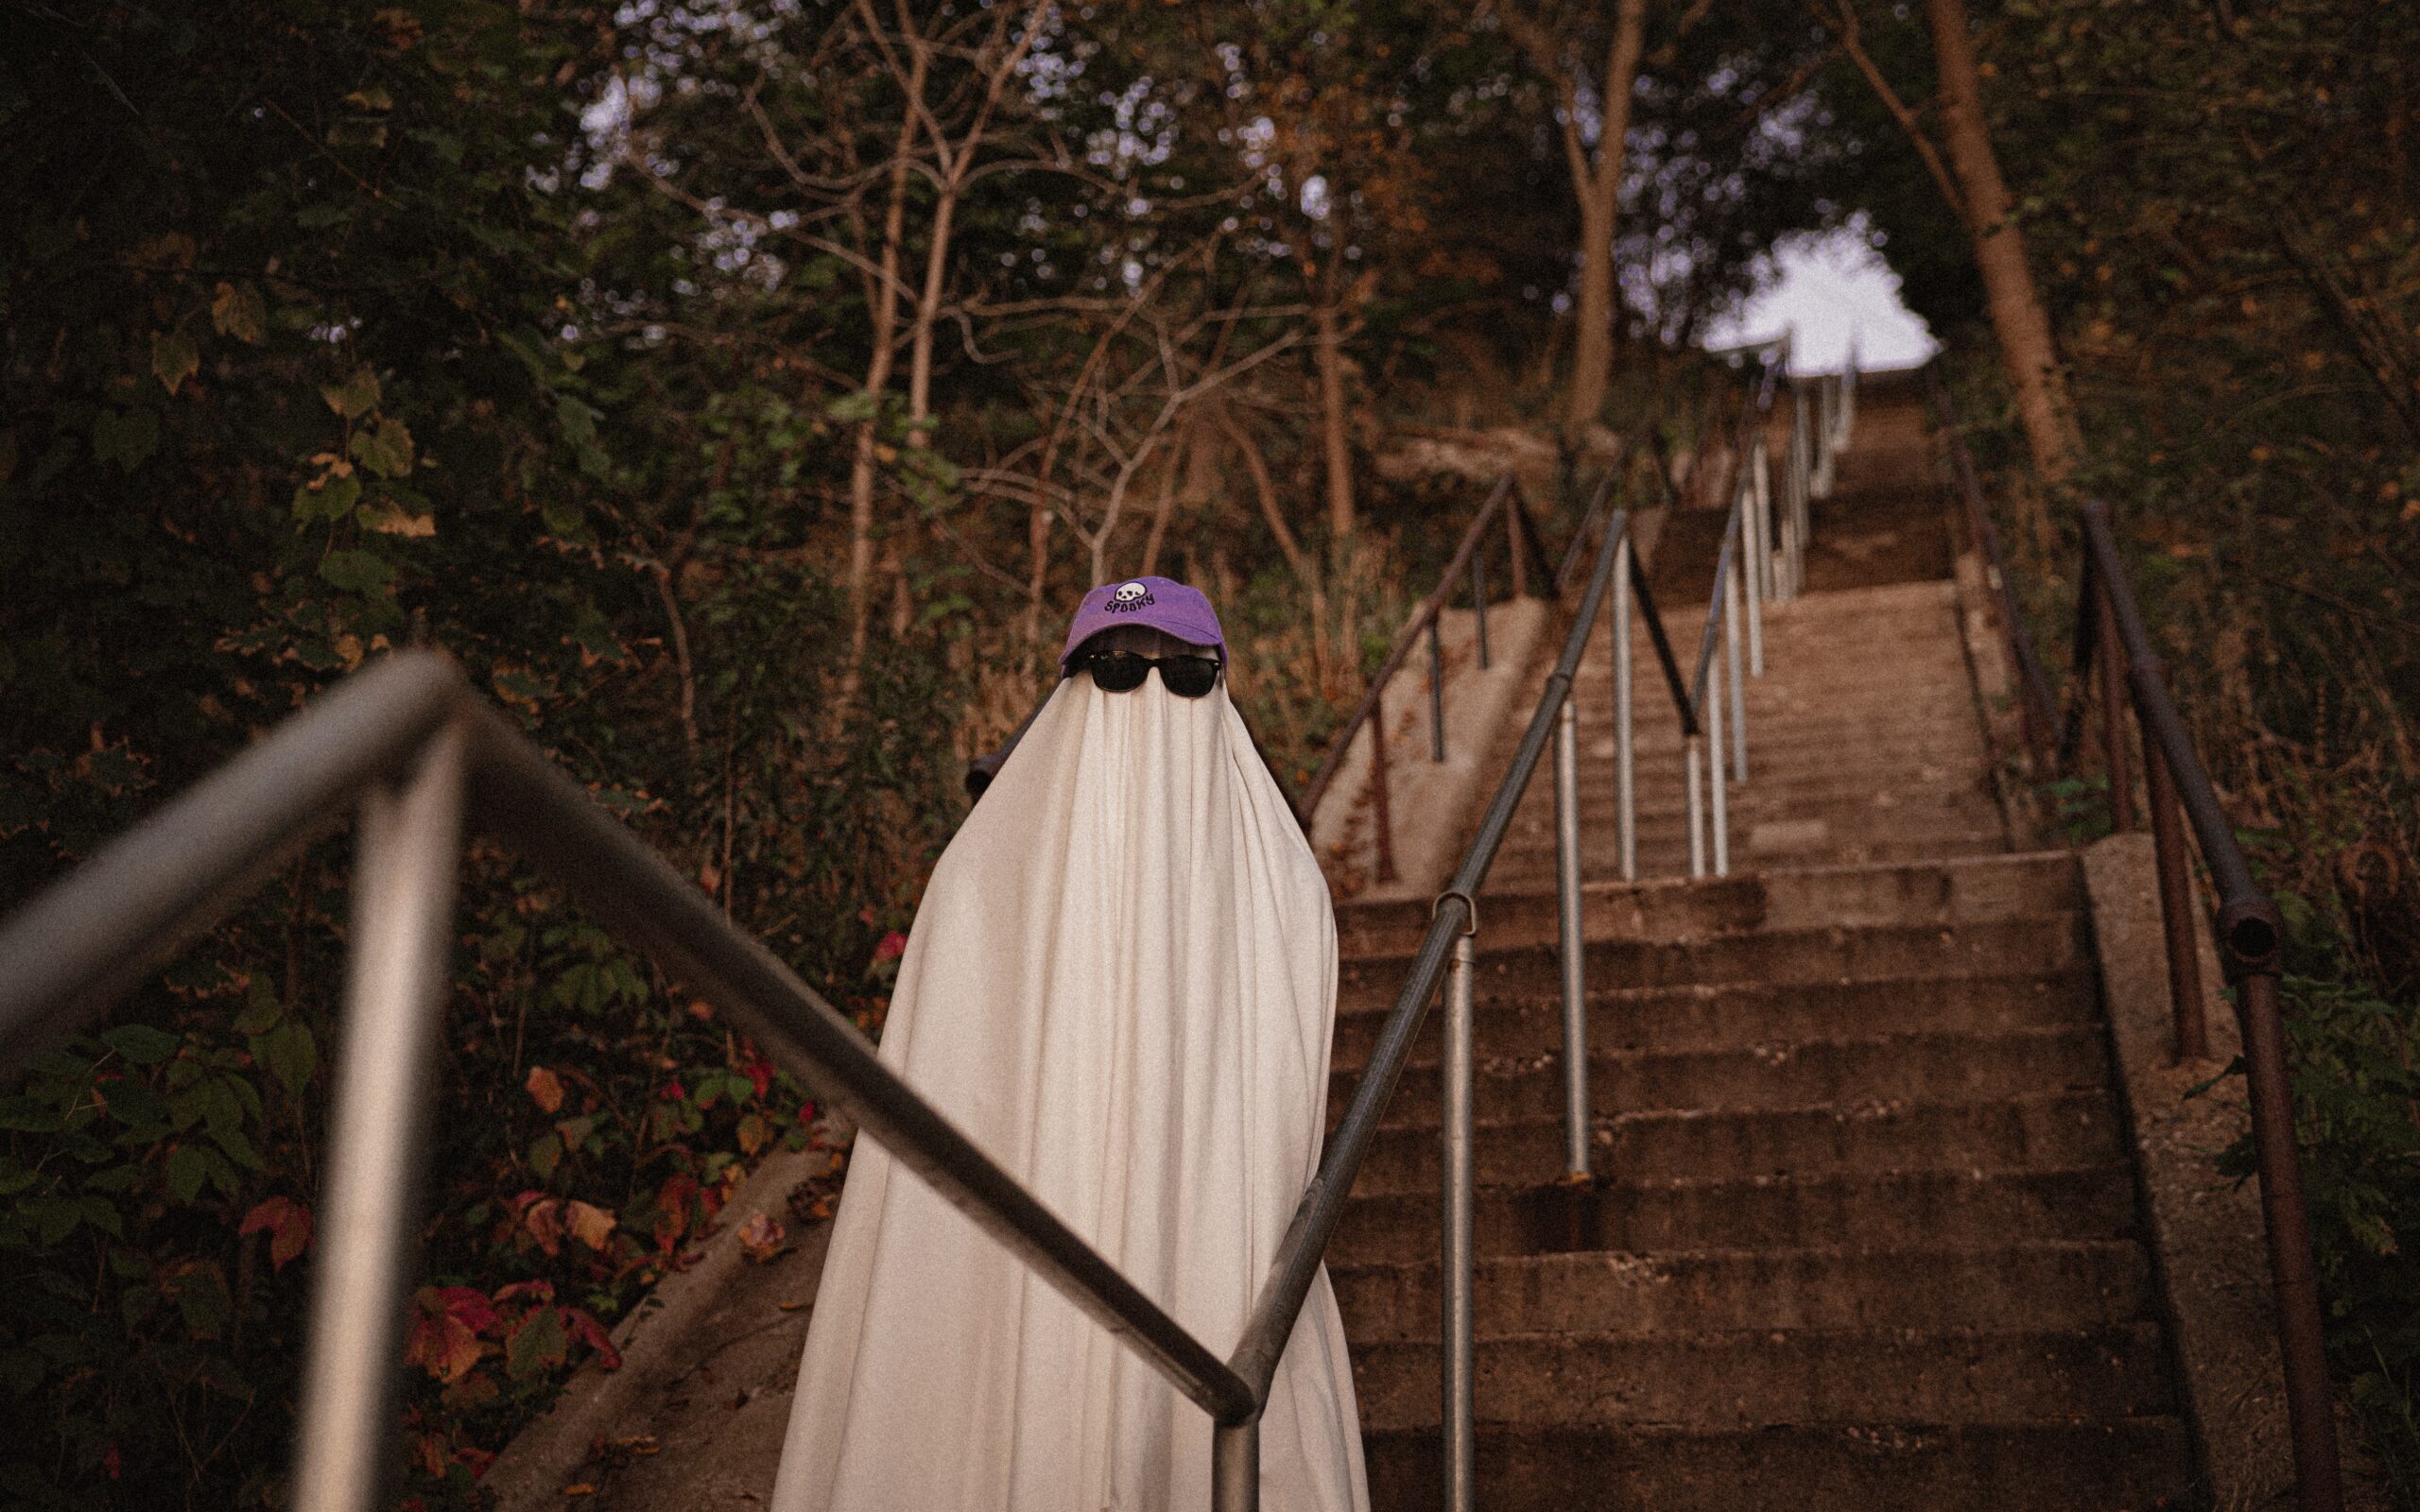 ghost costume stood on stairs wearing sunglasses.